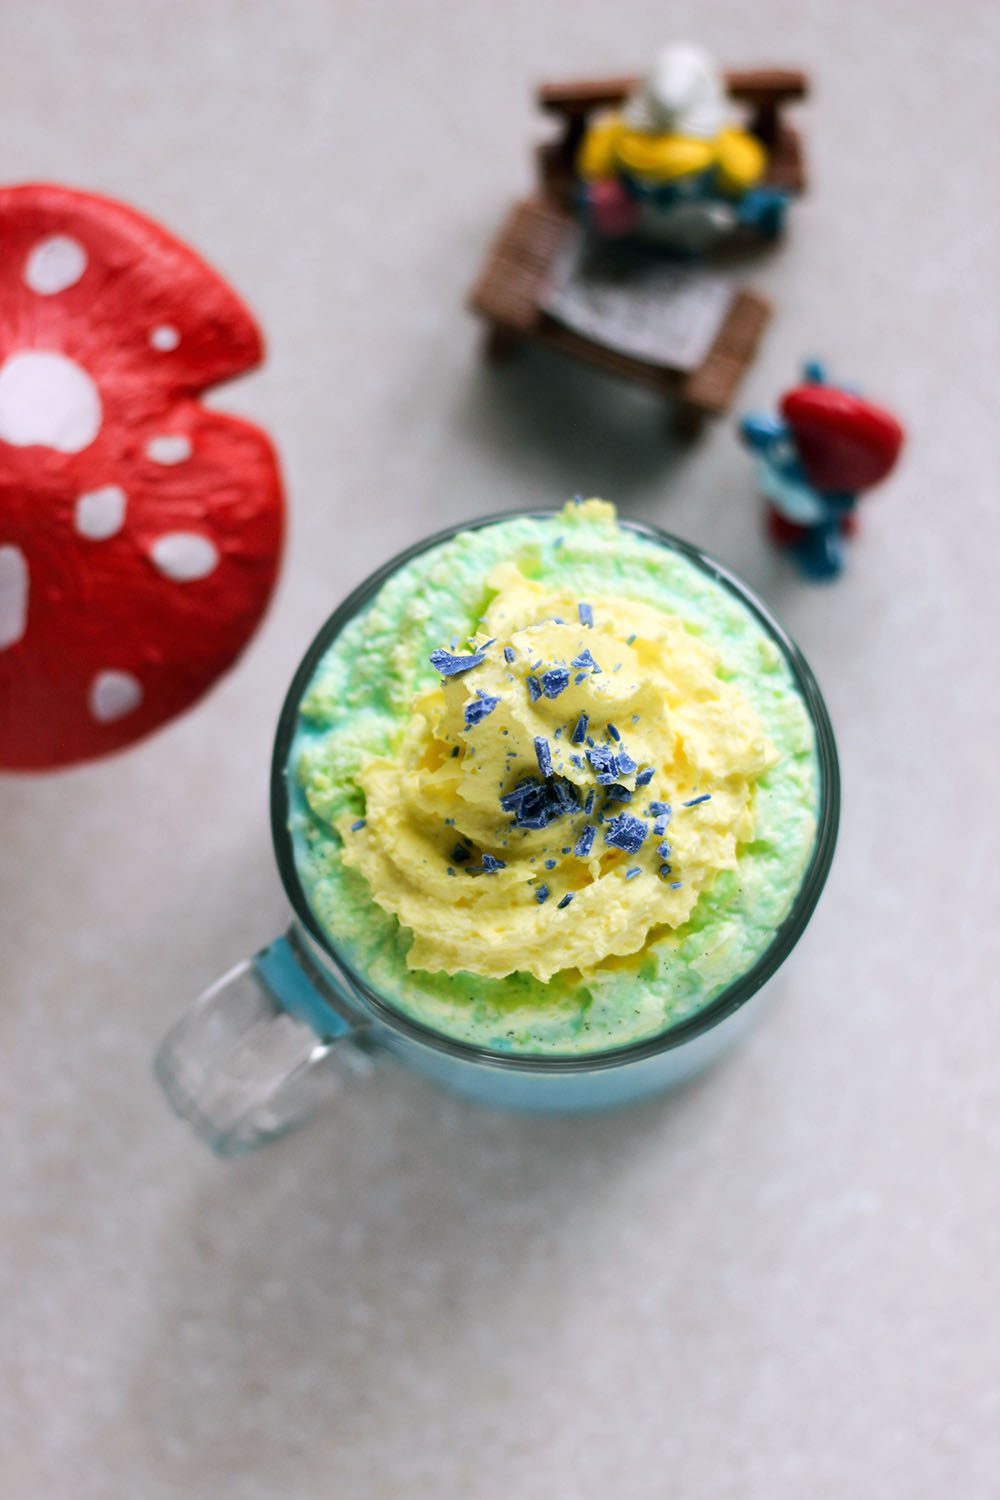 Blue hot drink with yellow whipped cream and vintage Smurf toys